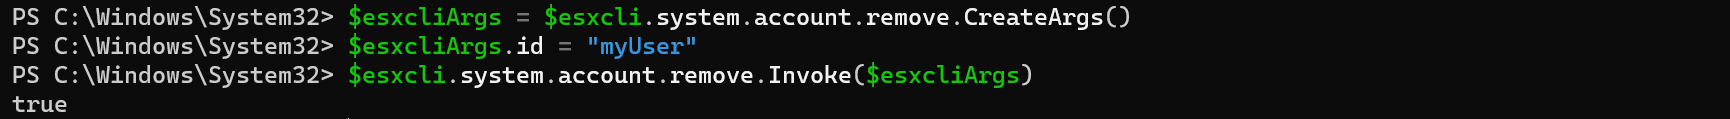 Screenshot showing the esxcli commands to delete a user account